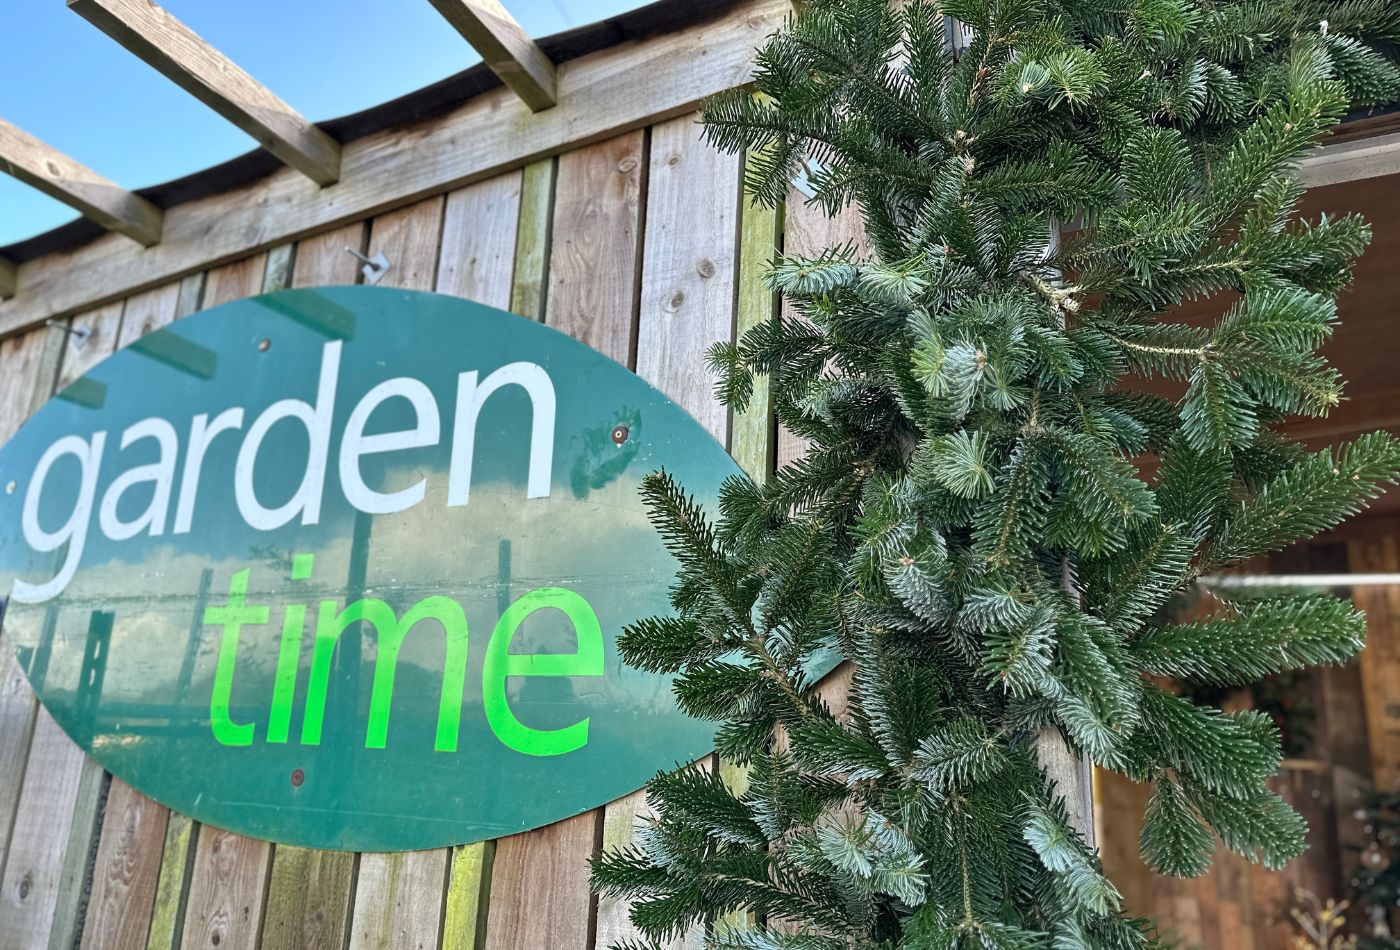 Christmastime at Gardentime - A Festive Q&A with local Garden Center